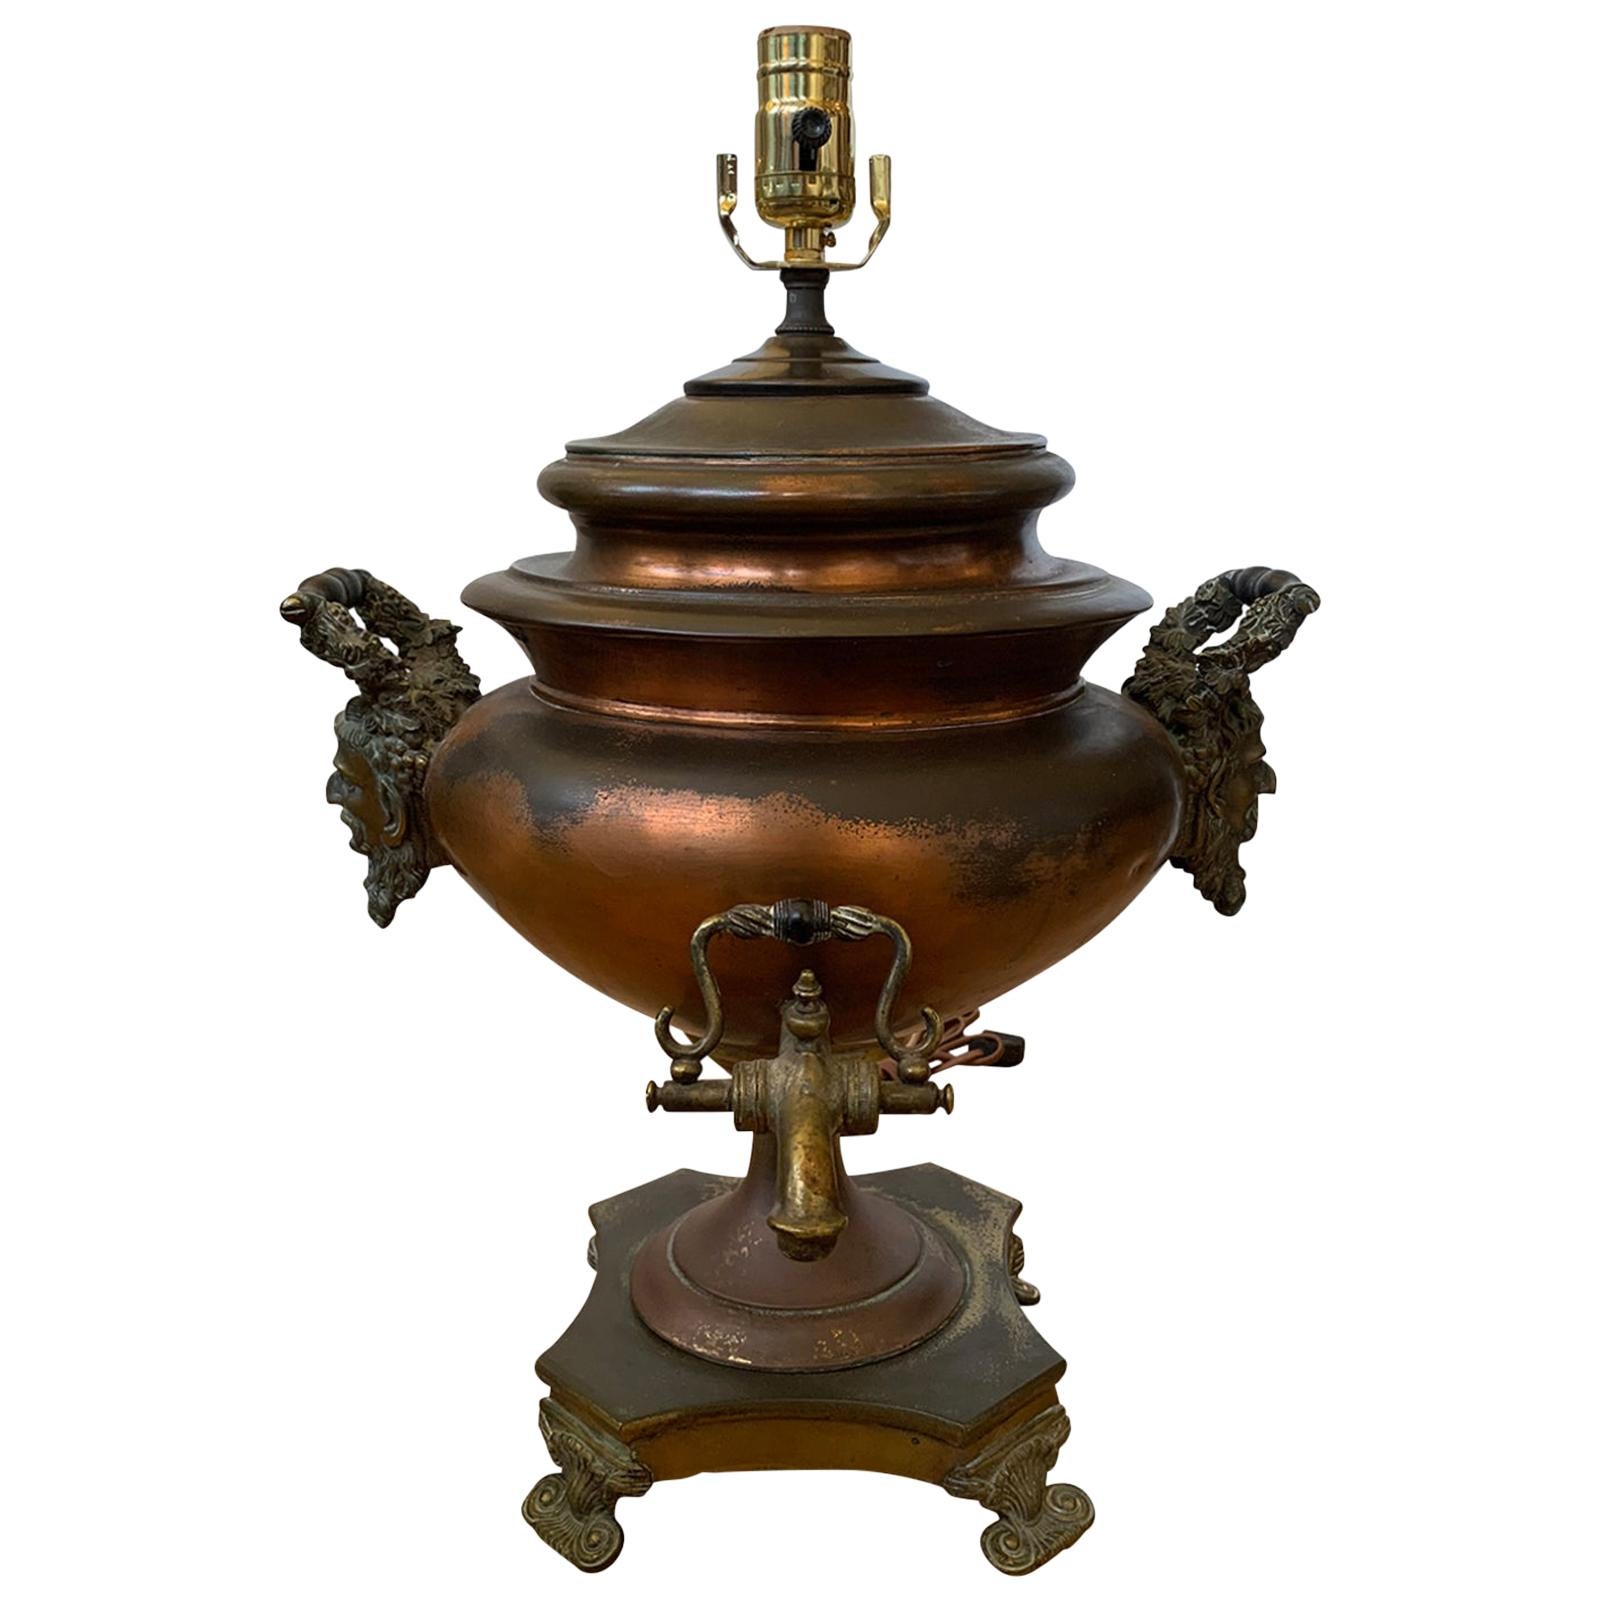 19th-20th Century Copper and Brass Hot Water Urn as Lamp For Sale